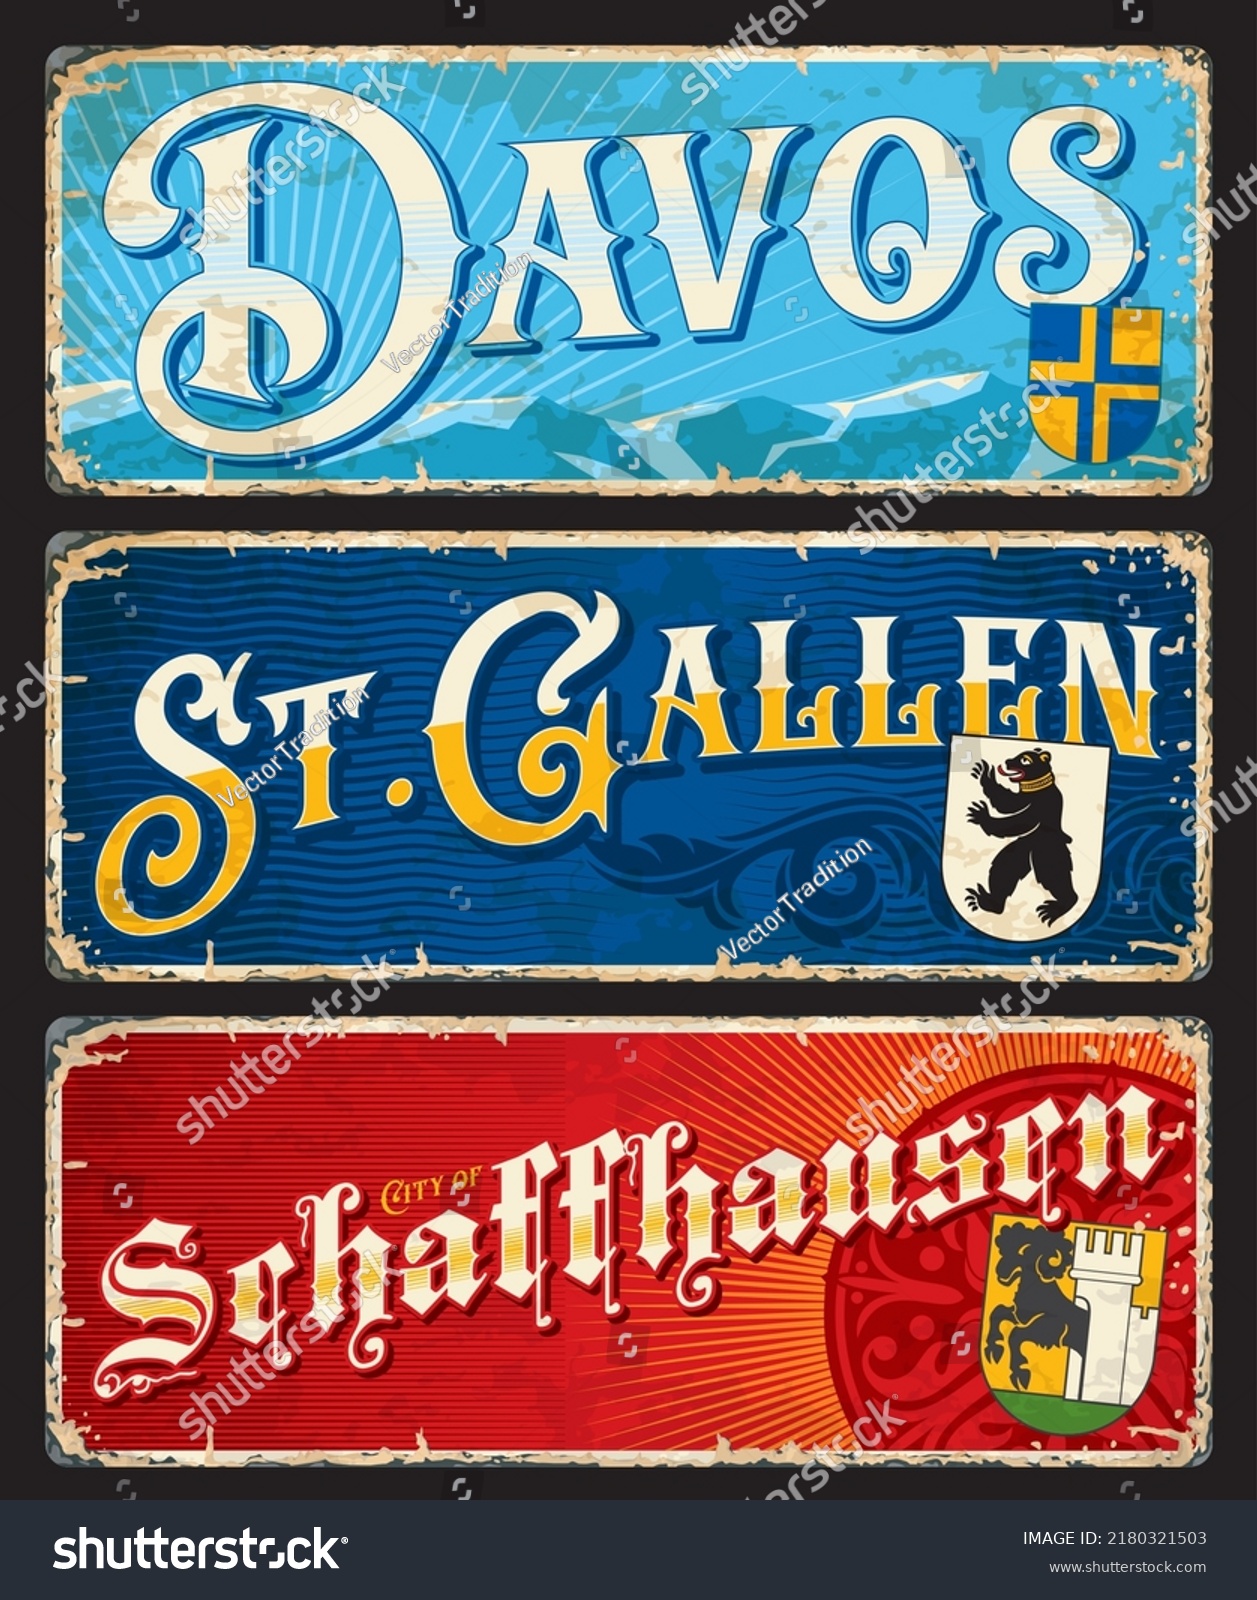 SVG of Davos, Saint Gallen, Schaffhausen, Swiss city travel stickers and plates, vector luggage tags. Switzerland travel tin signs and tourism trip stickers or grunge plates with Swiss canton cities emblems svg